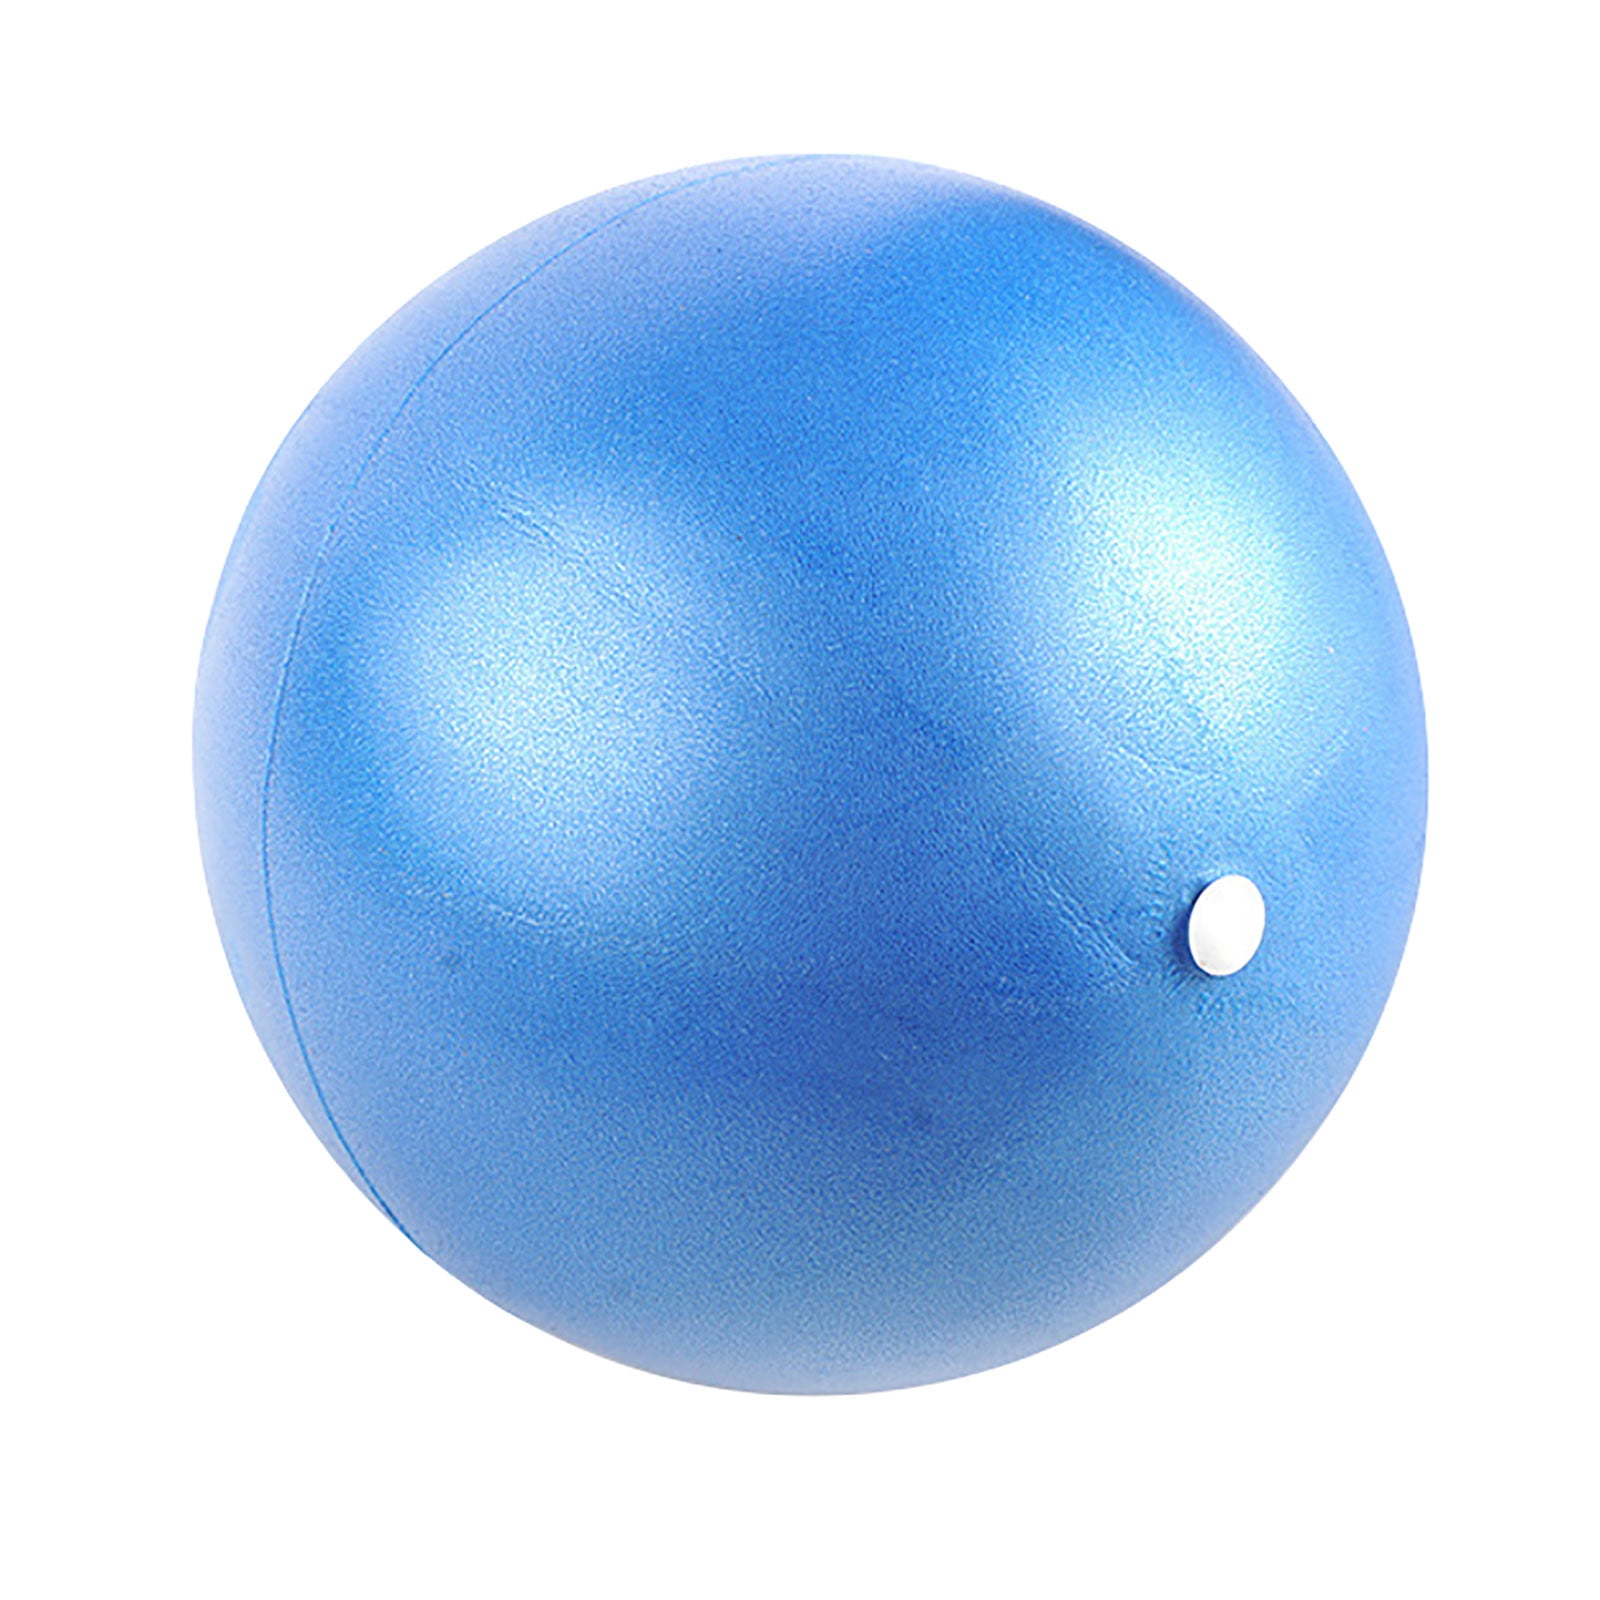 Details about   Yoga Ball Fitness For Fitness PVC Pilates Exercise Stability Balance Ball 15CM 